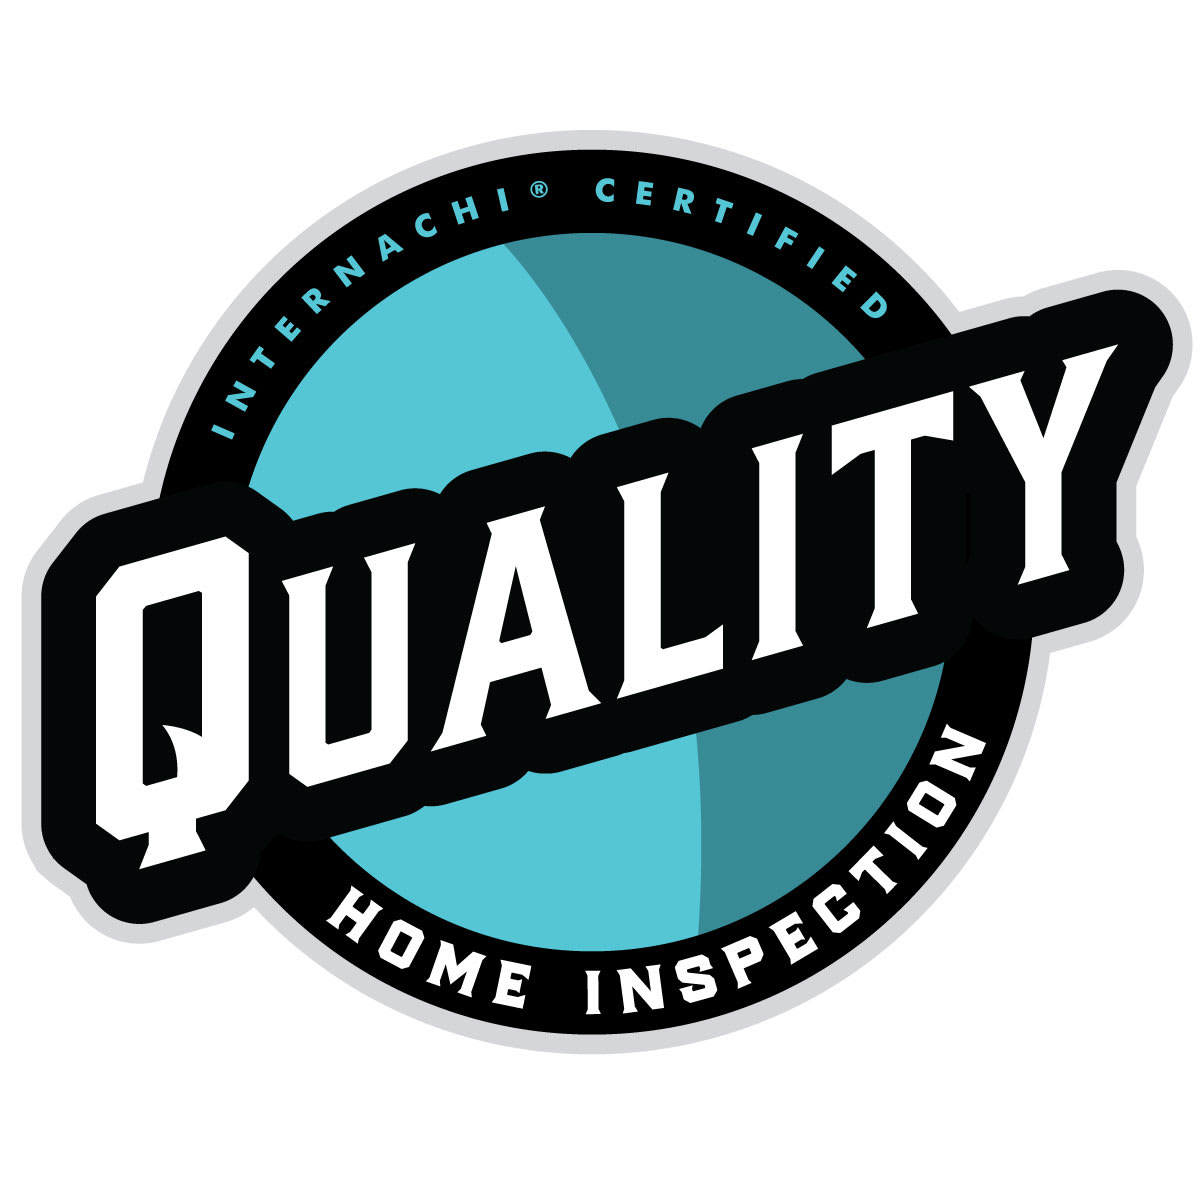 Quality Home Inspection Services & More LLC Logo